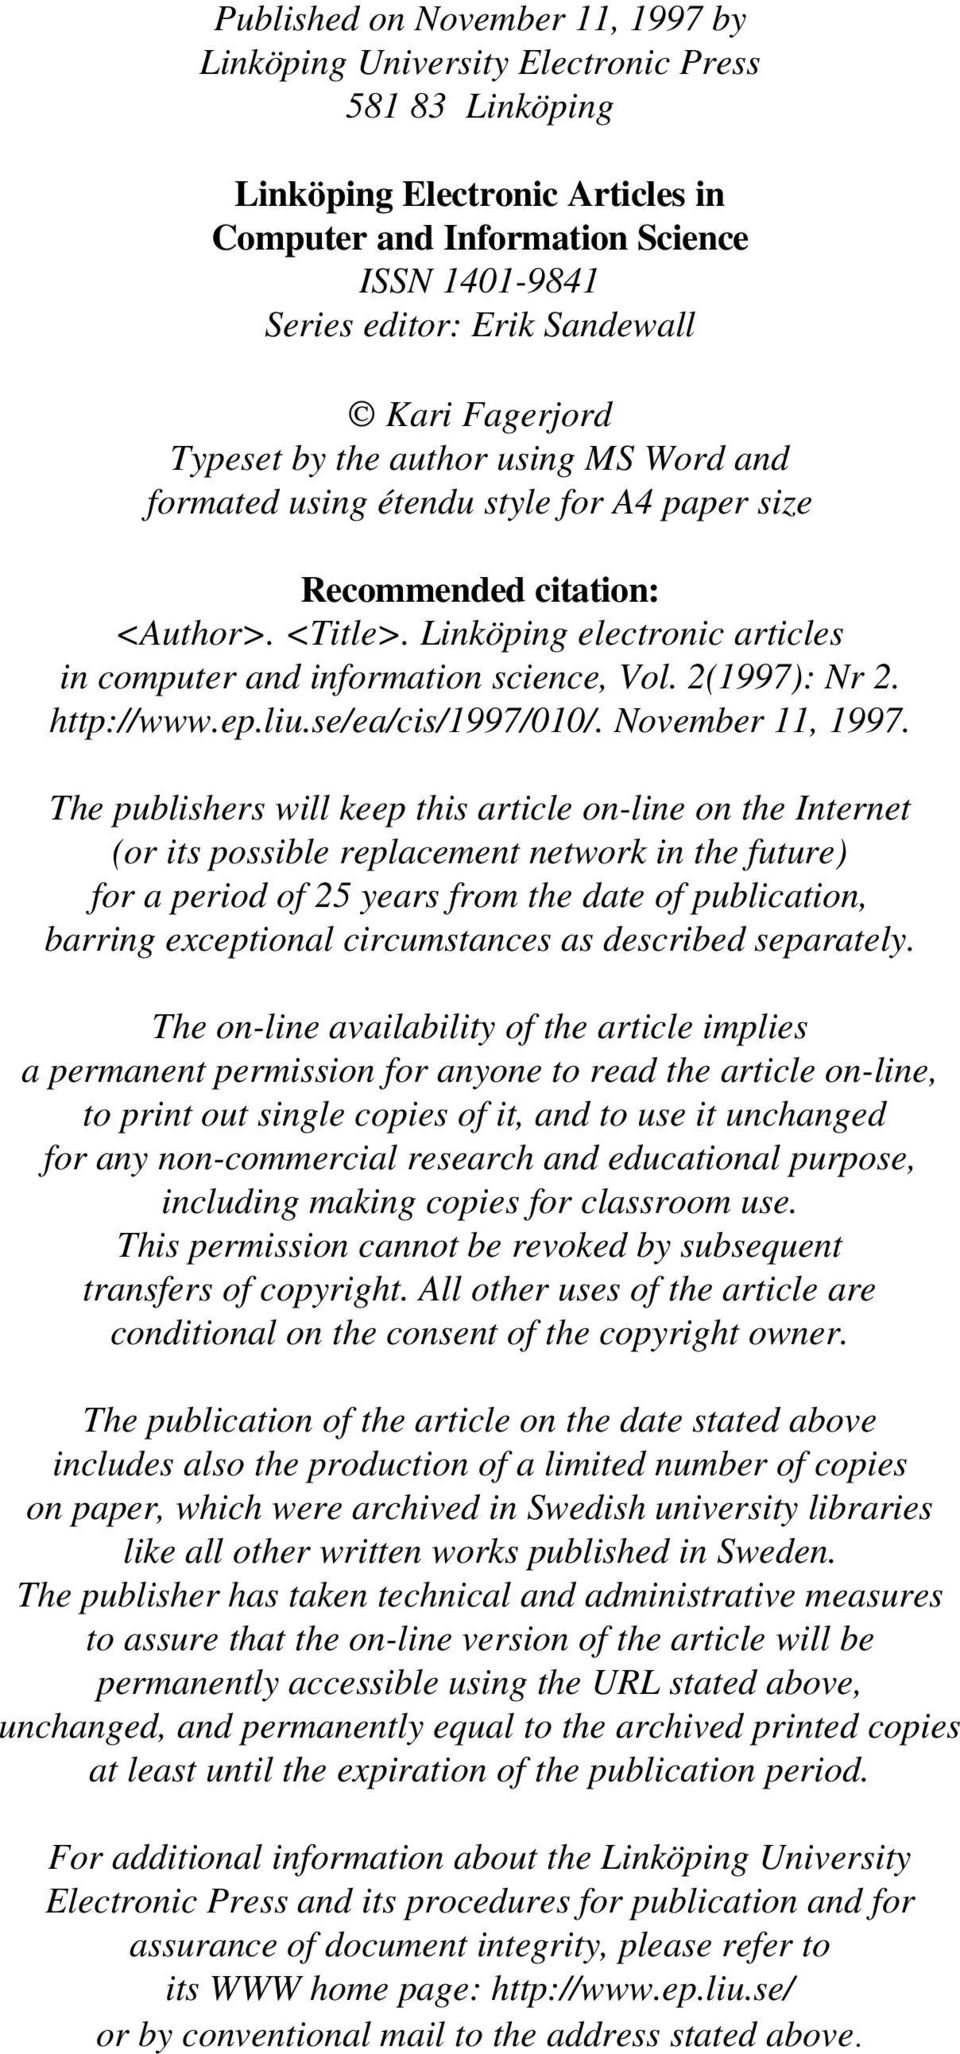 Linköping electronic articles in computer and information science, Vol. 2(1997): Nr 2. http://www.ep.liu.se/ea/cis/1997/010/. November 11, 1997.